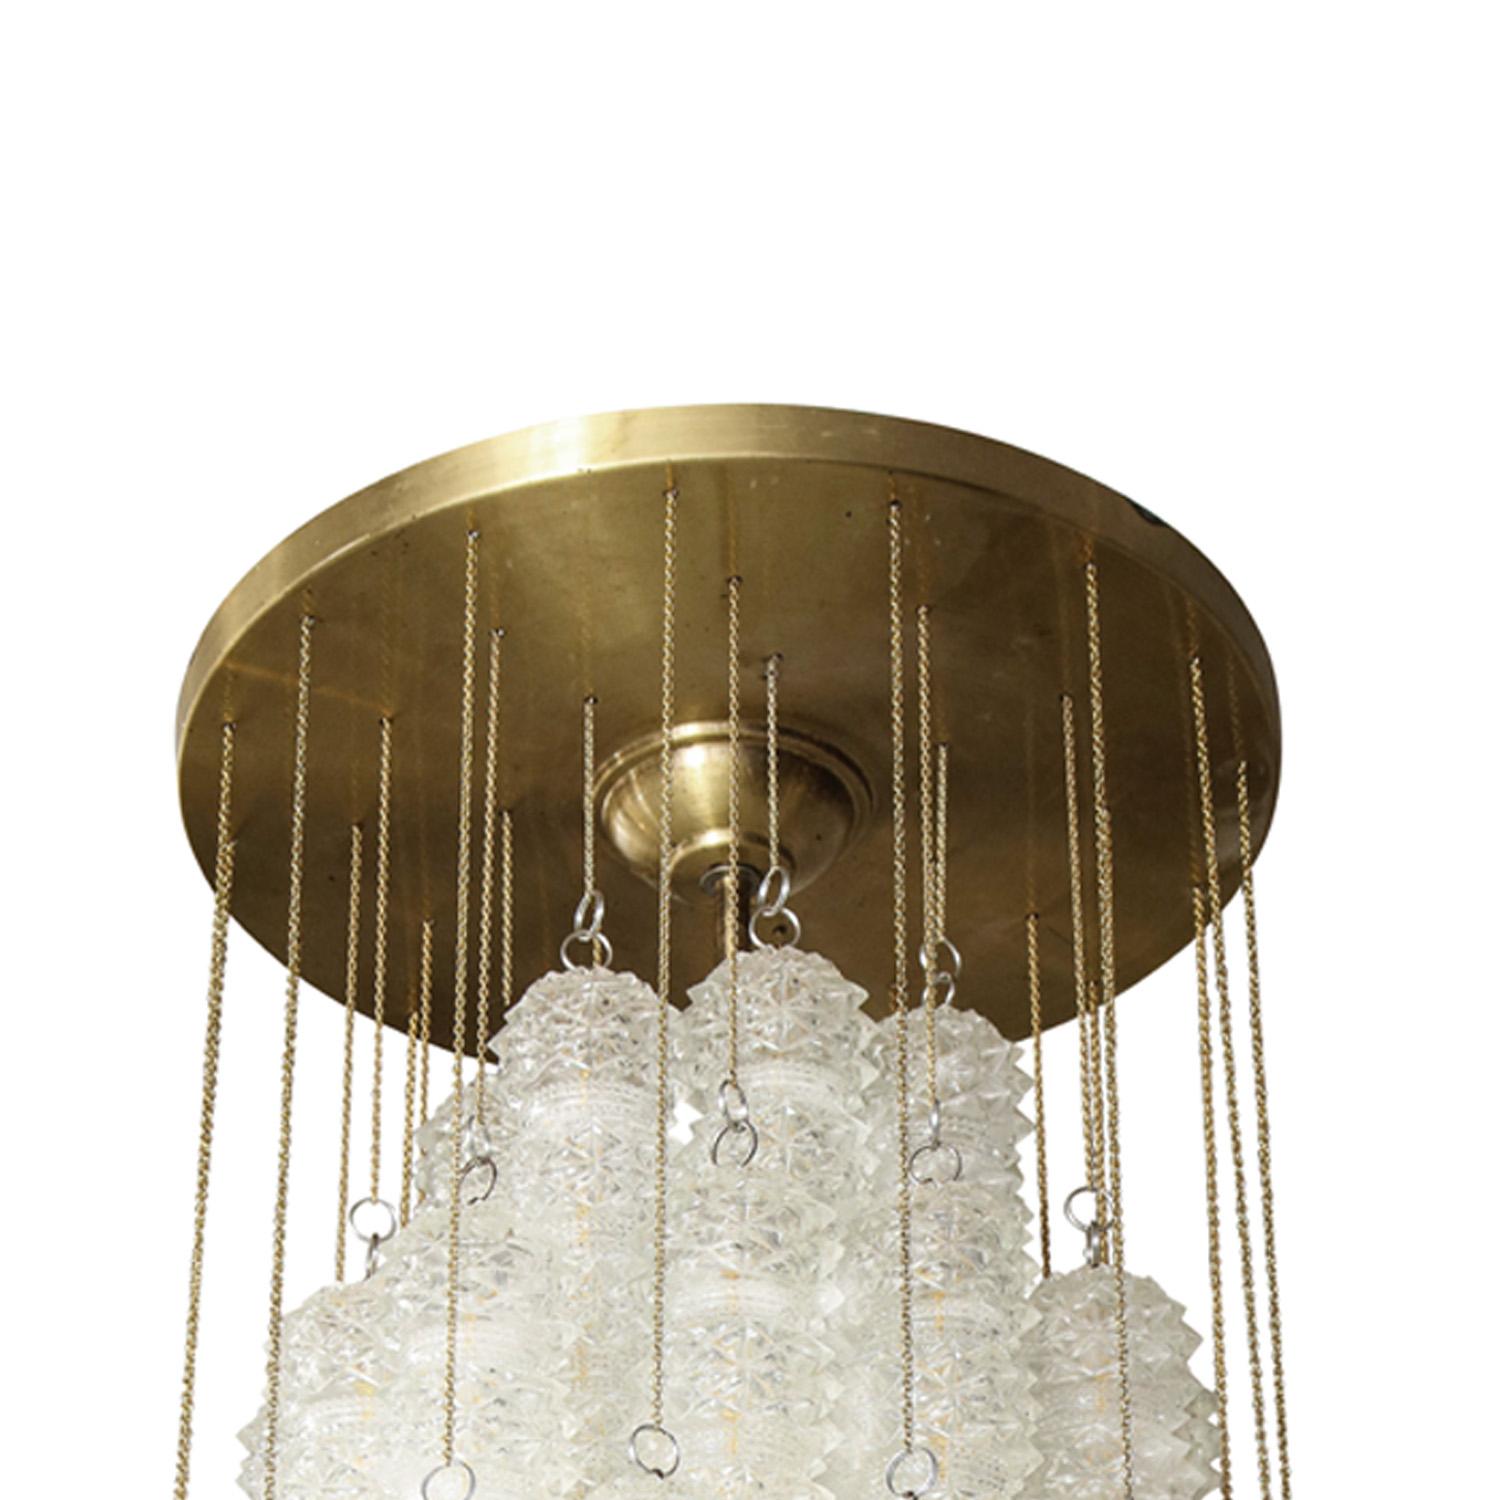 Stunning cut crystal cylinder glass chandelier with brass canopy and suspension by J.T. Kalmar, Austrian 1960's. This fixture is a stunning example of Kalmar's mid-century designs. There is a matching pair of sconces available.